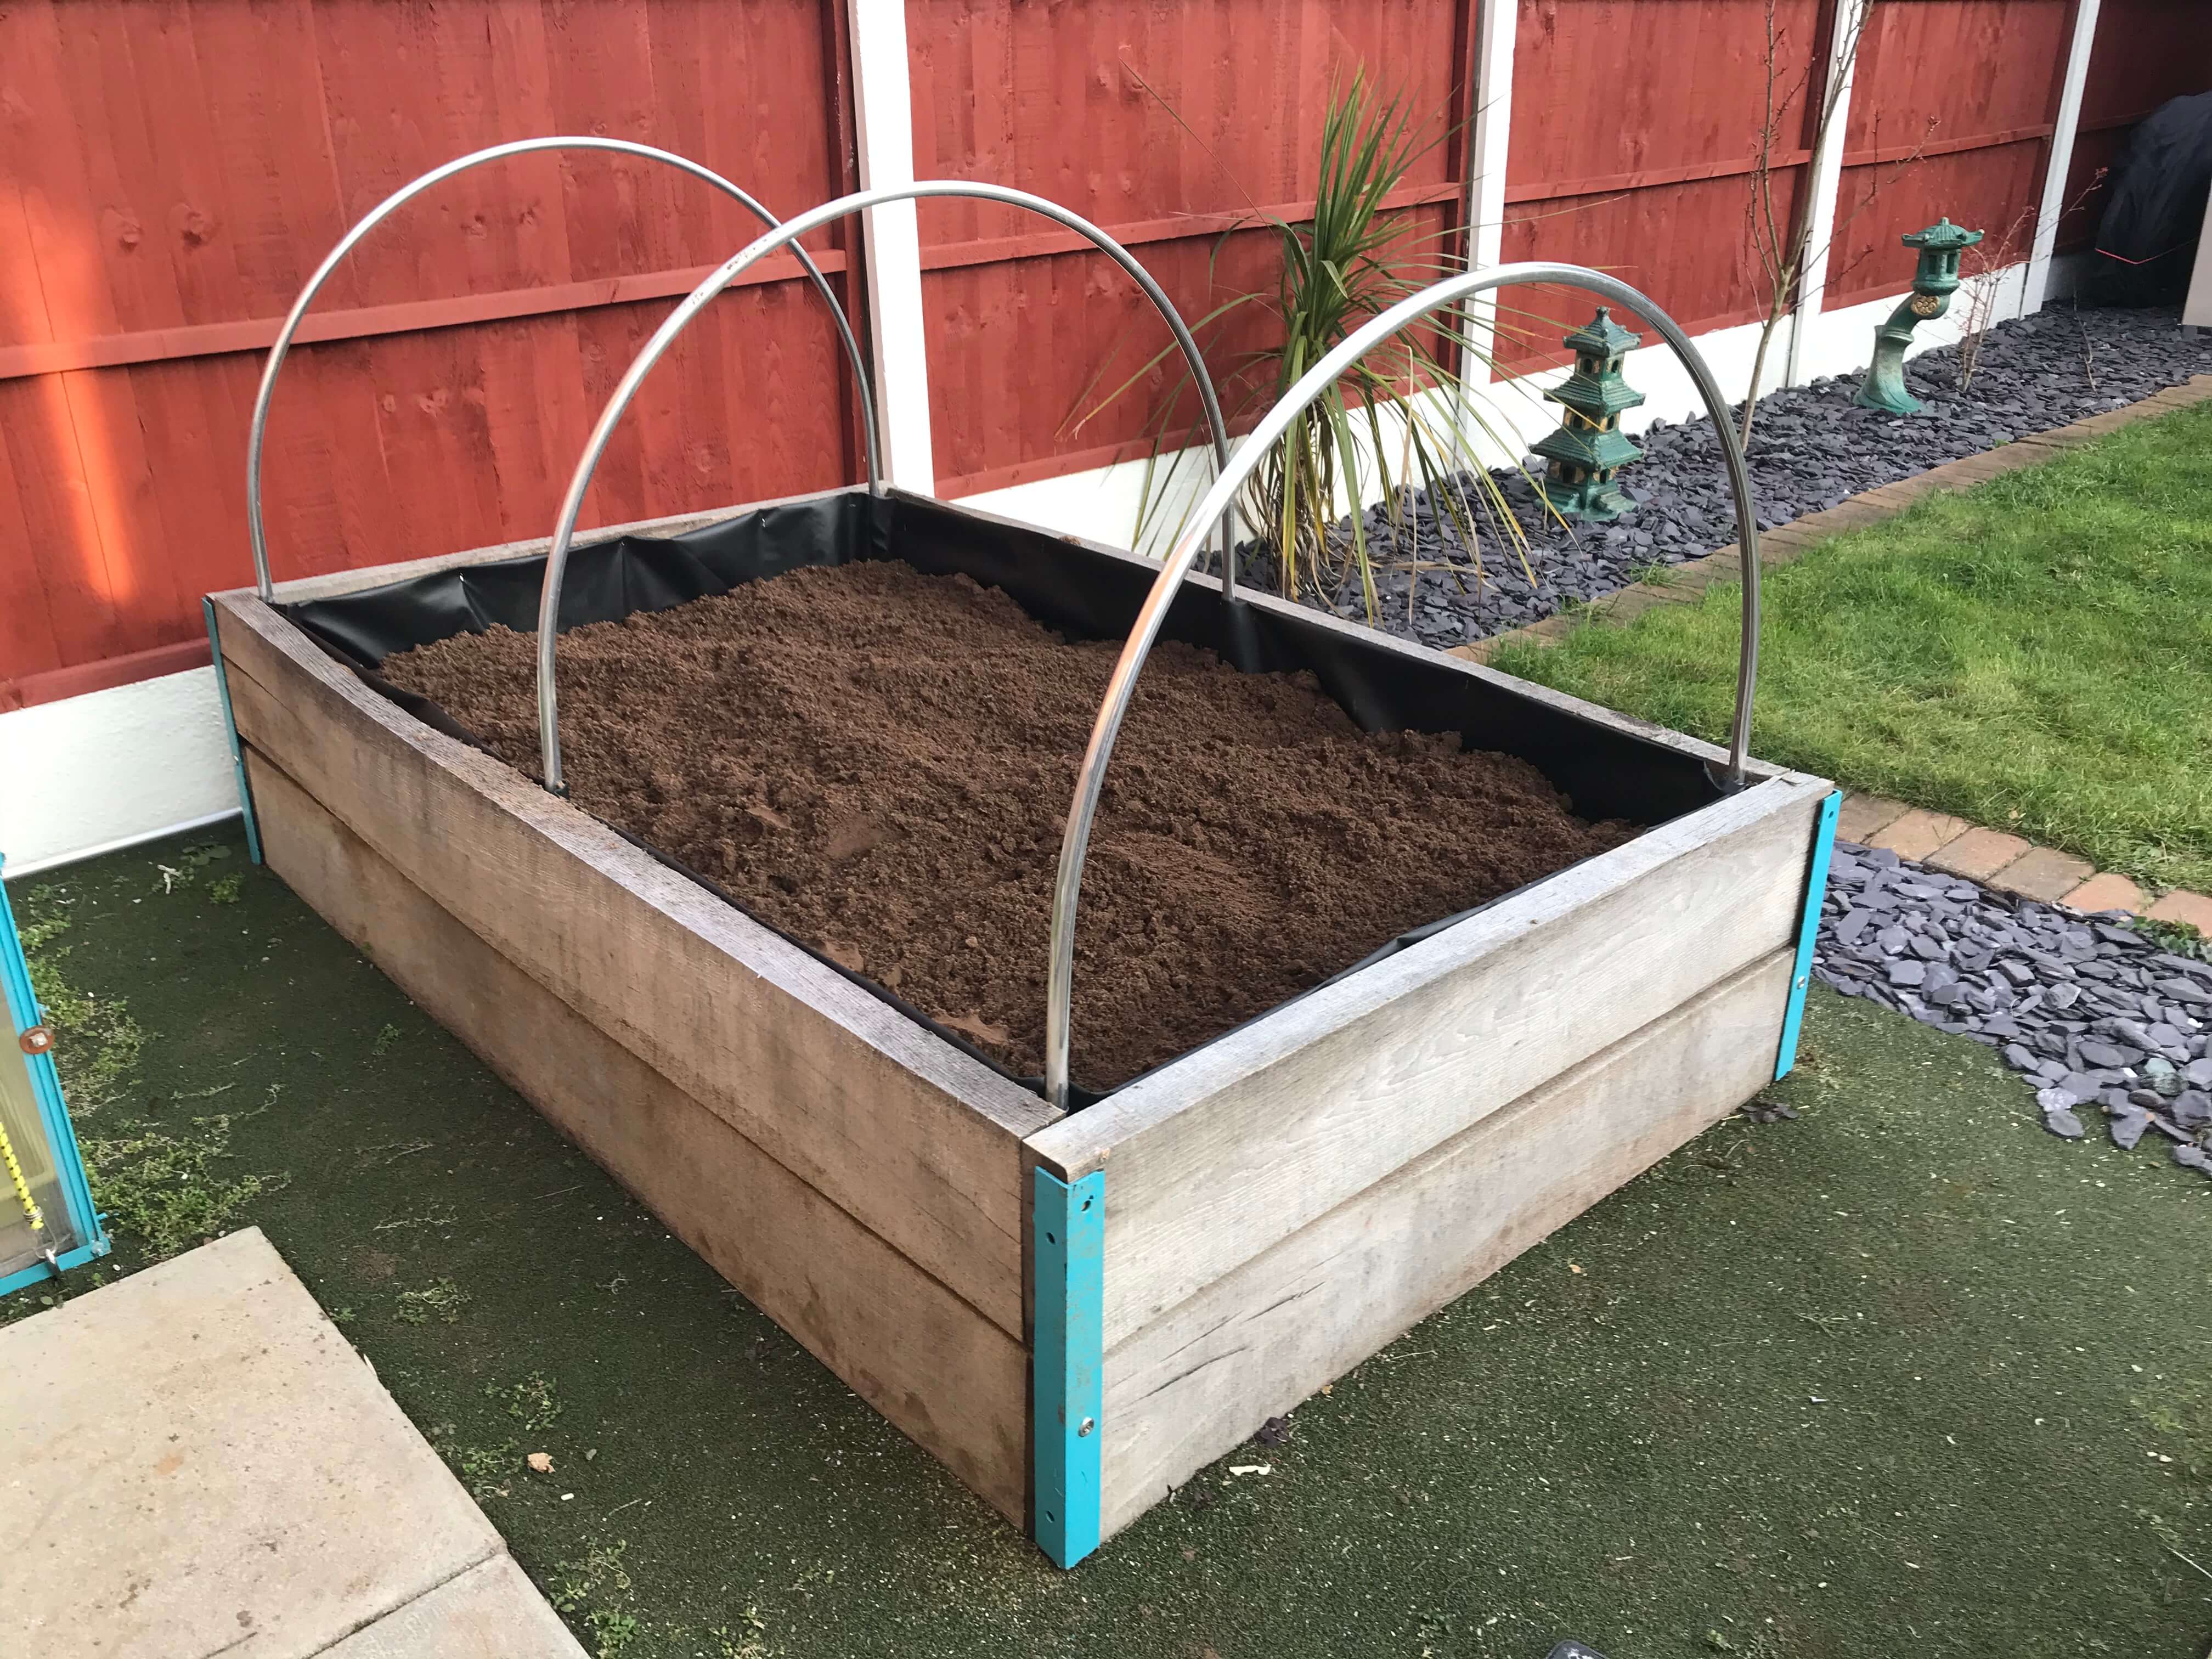 Clean and simple raised bed built with green railway sleepers